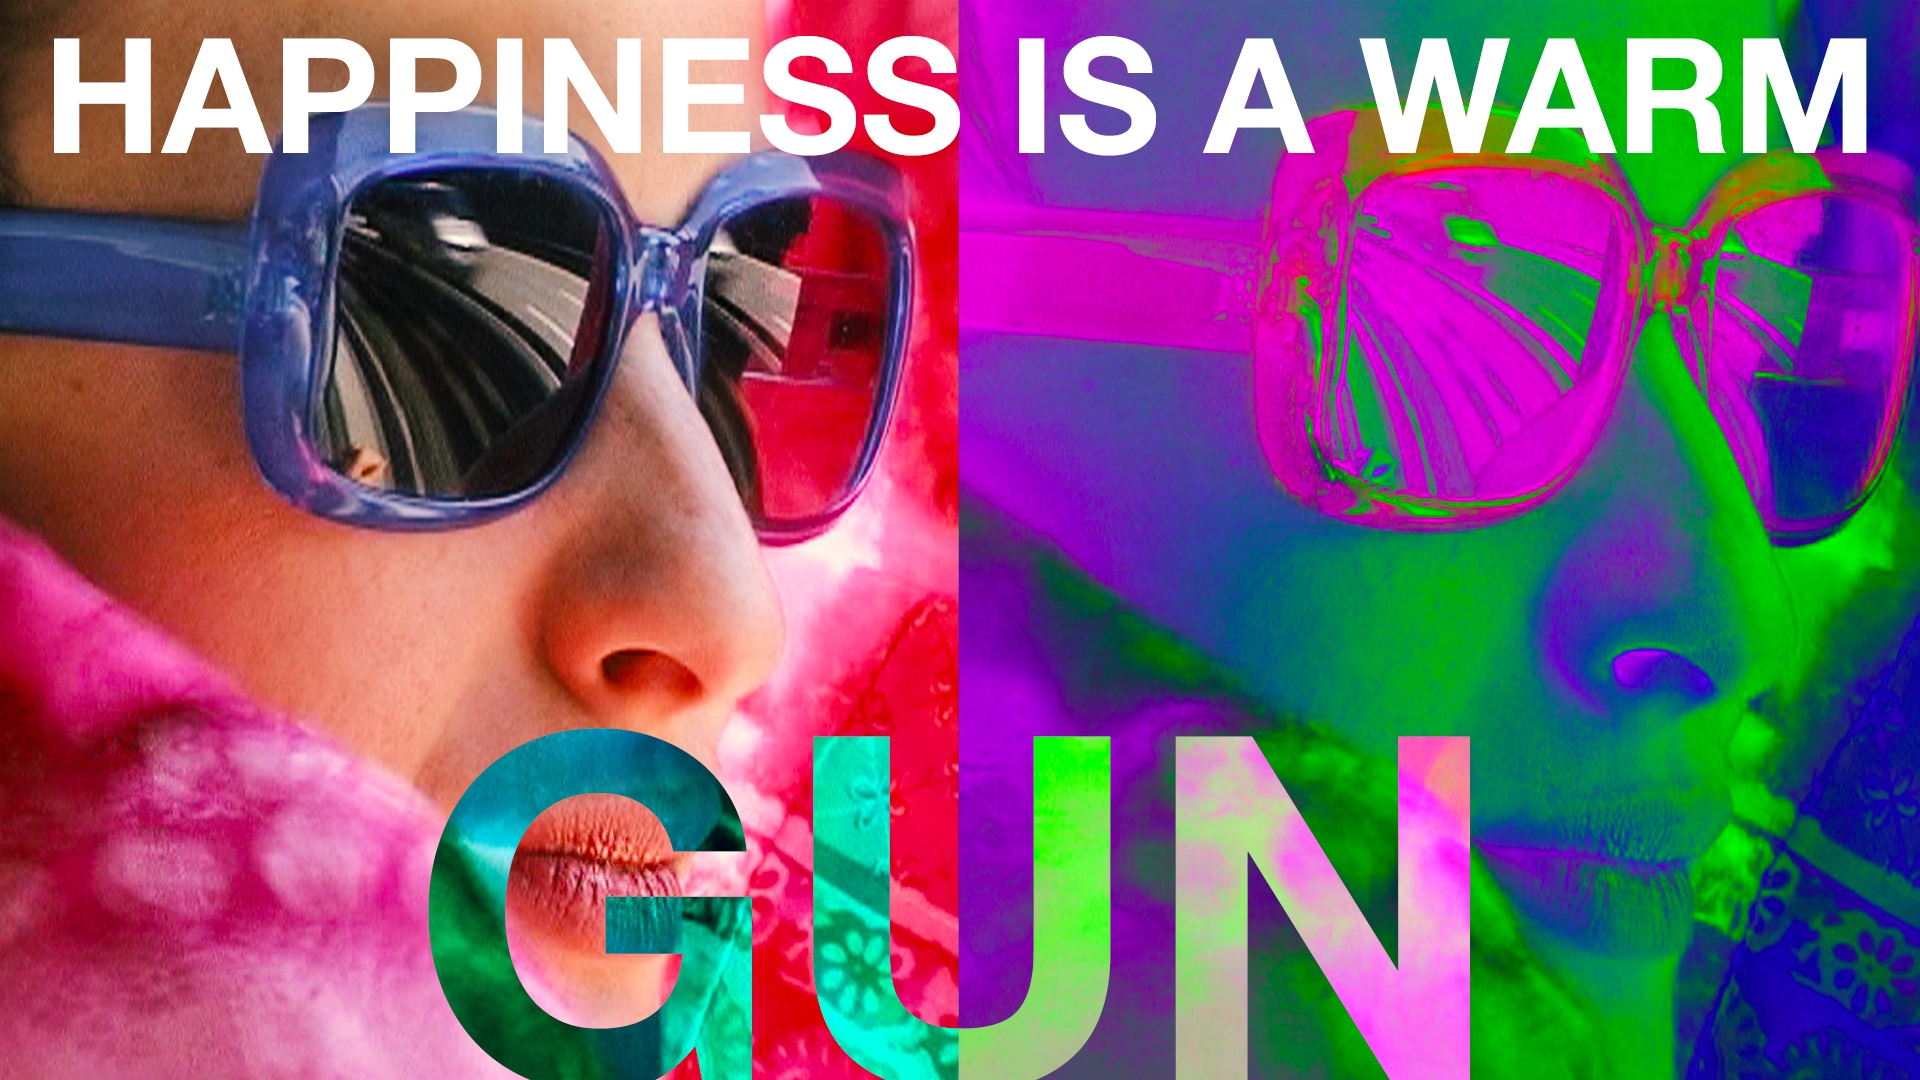 Happiness Is a Warm Gun